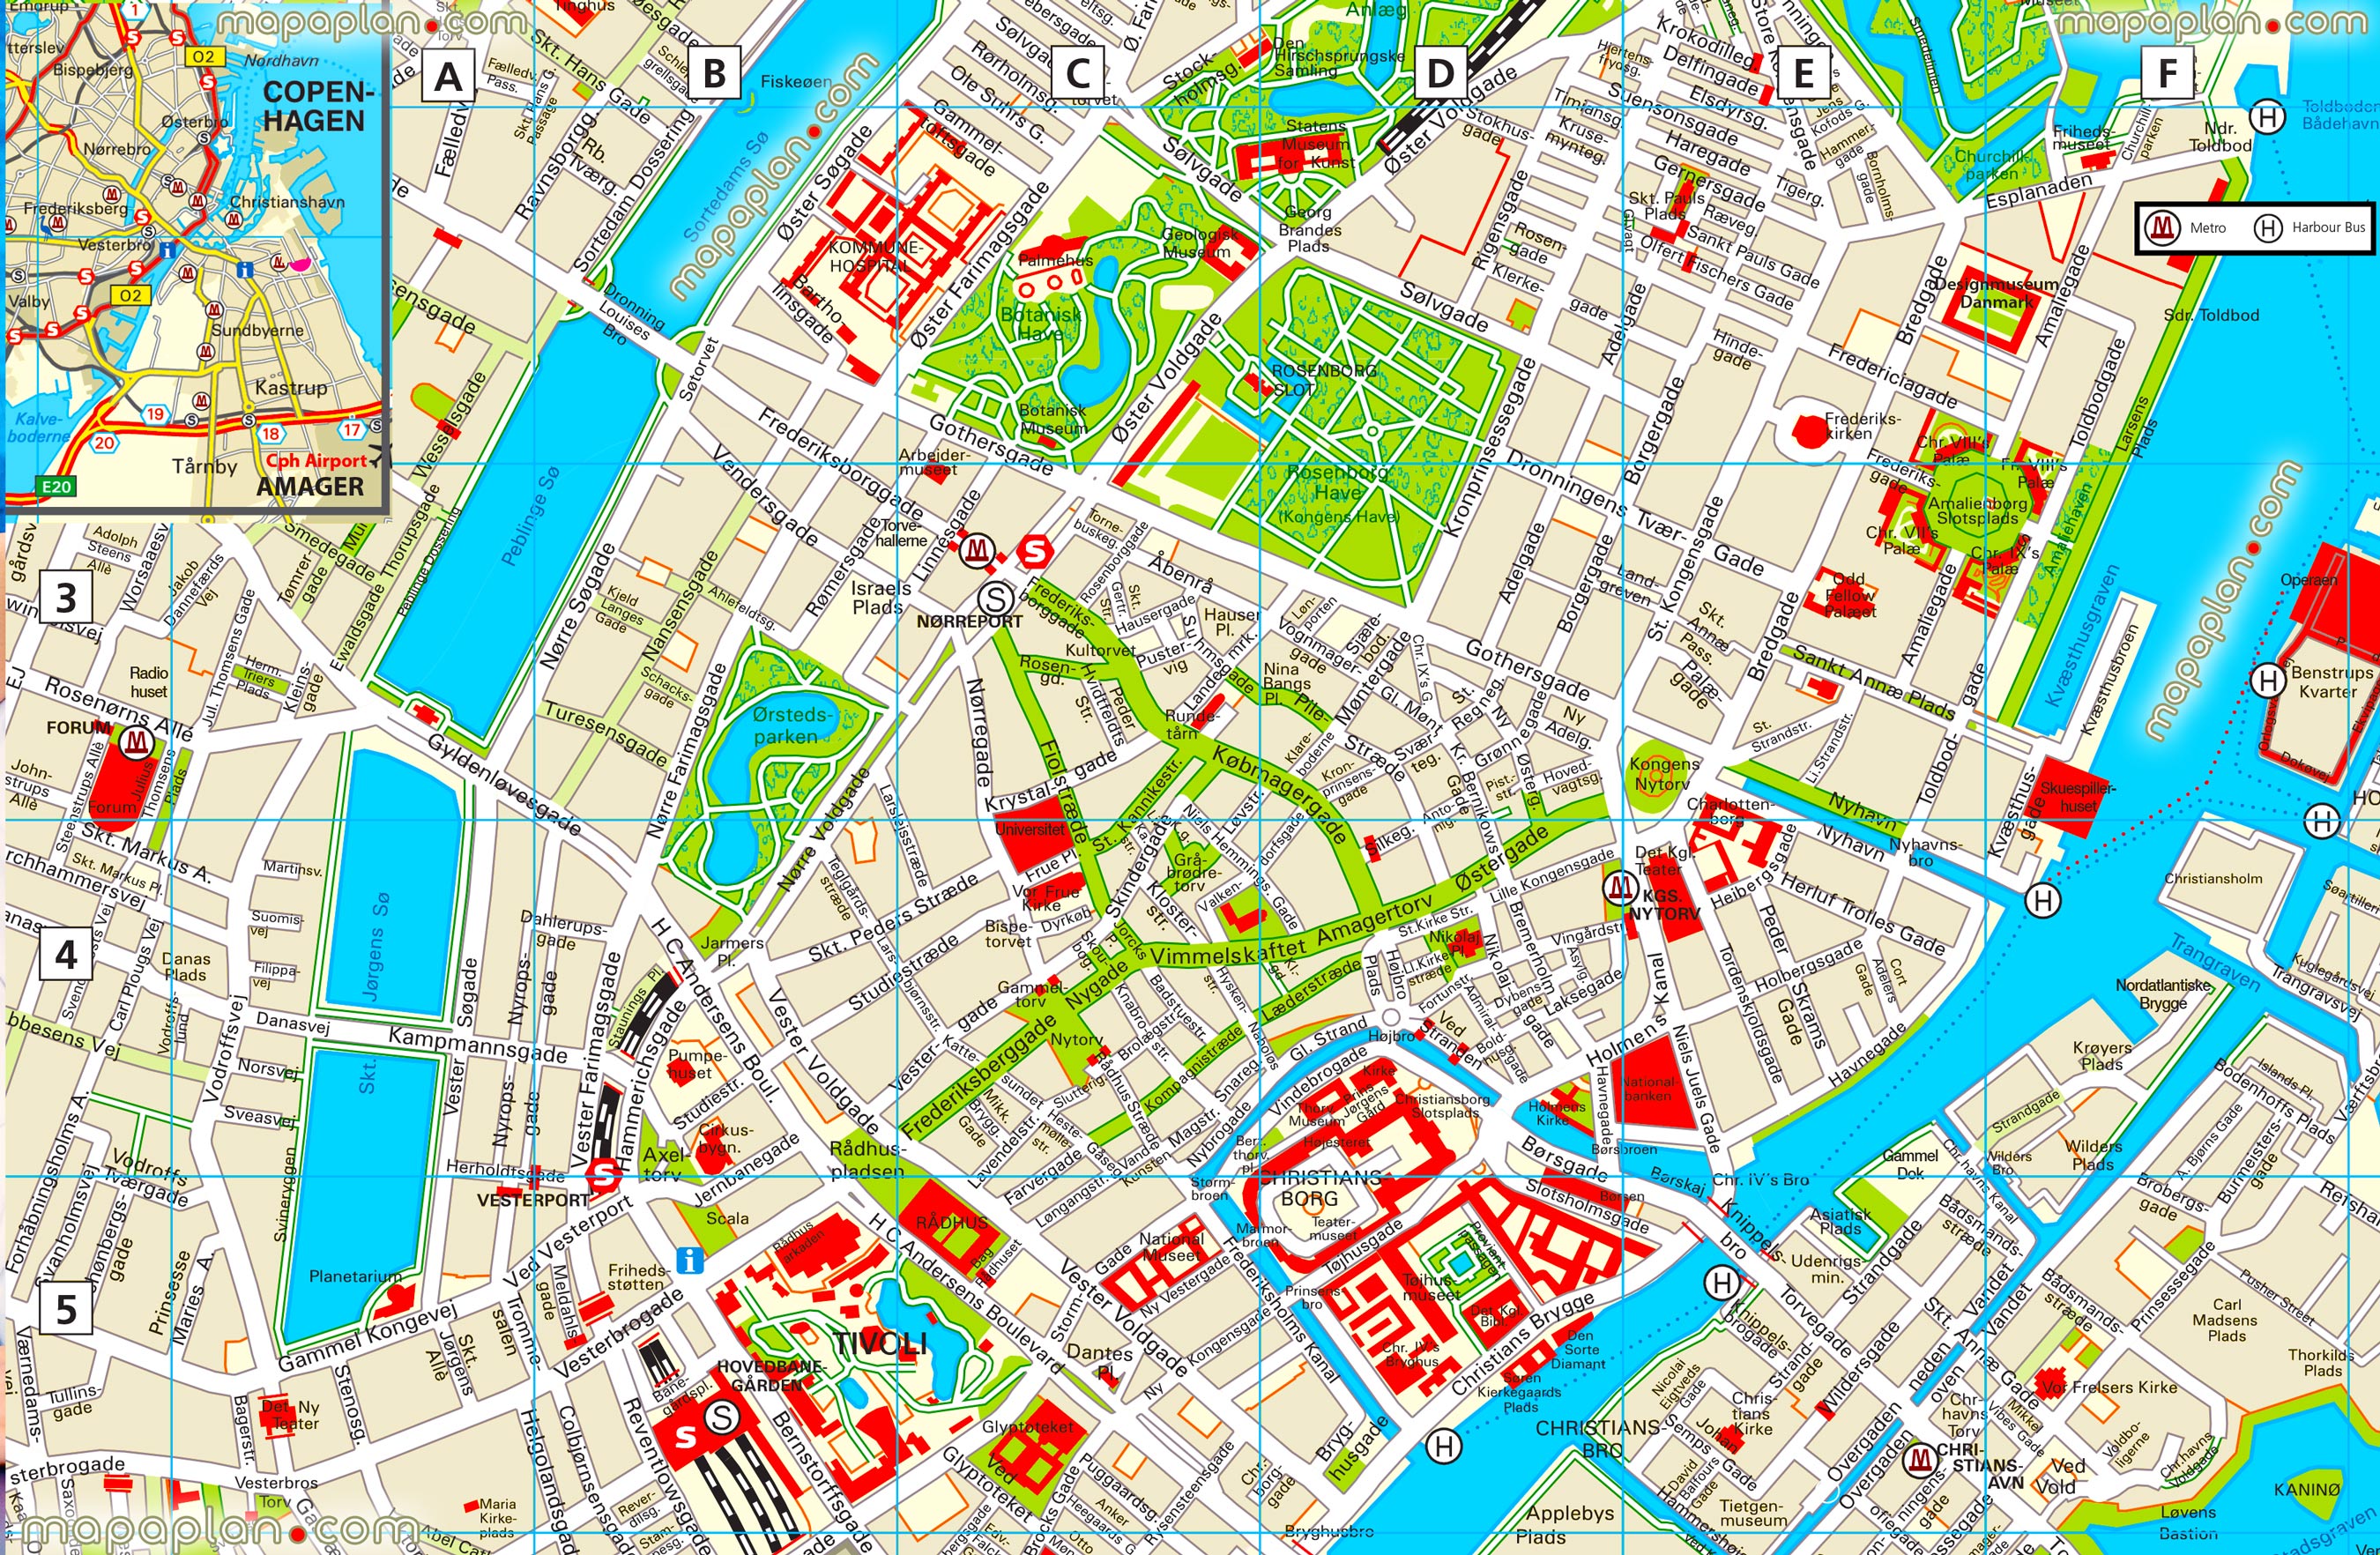 copenhagen printable detailed interactive virtual city centre kobenhavn kort downloadable tourist guide visitors english must see places high quality large scale vector layout plan free download offline travel places visit must see tourist attractions famous destinations tivoli christiansborg rosenborg slots Copenhagen Top tourist attractions map